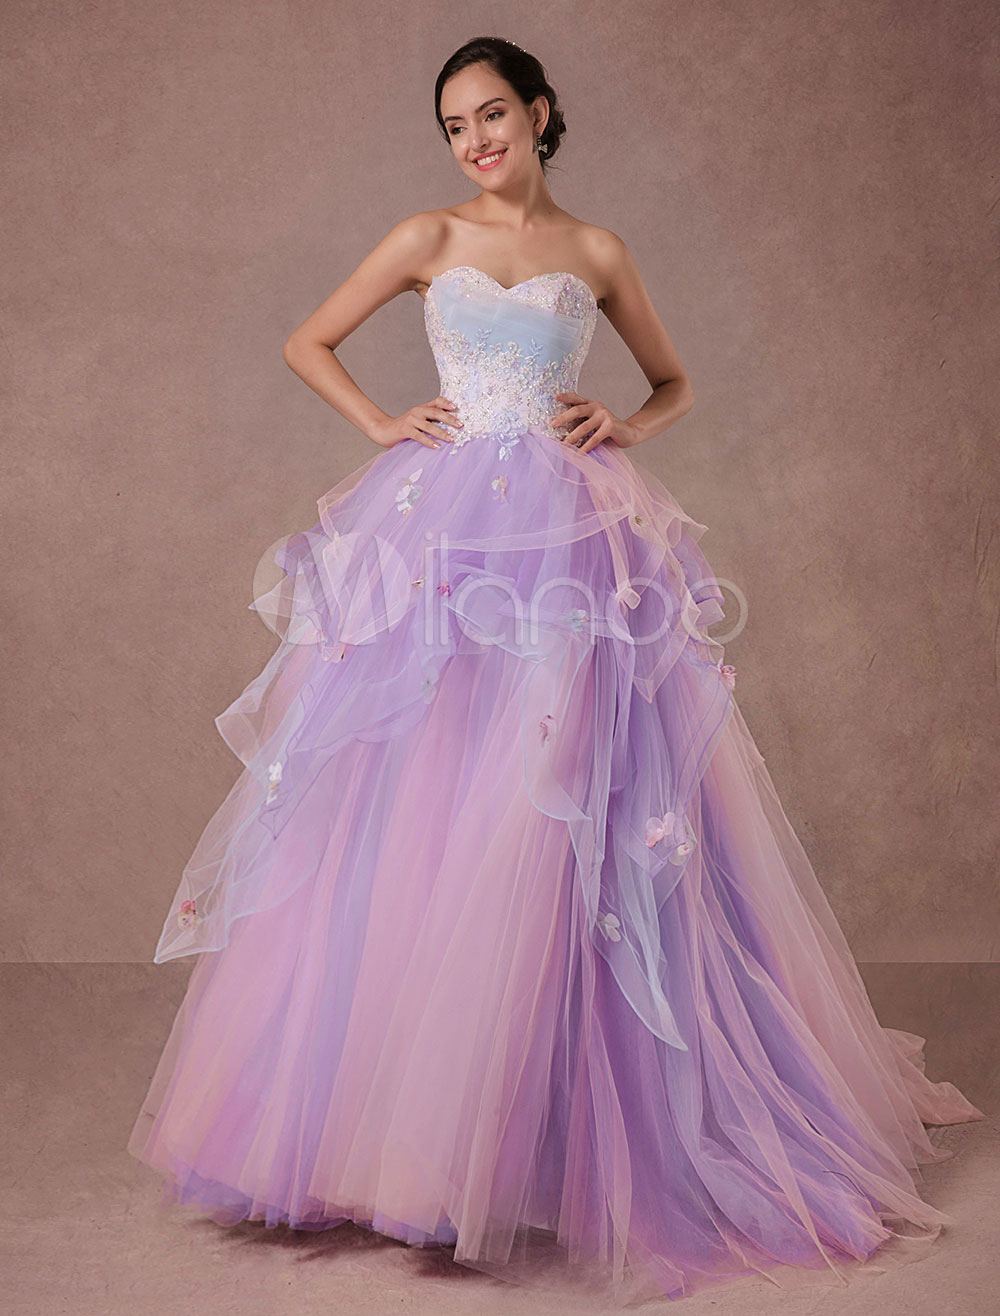 Ulle Pagent Dress Lace Beading Quinceanera Dress Chapel Train A-line ...